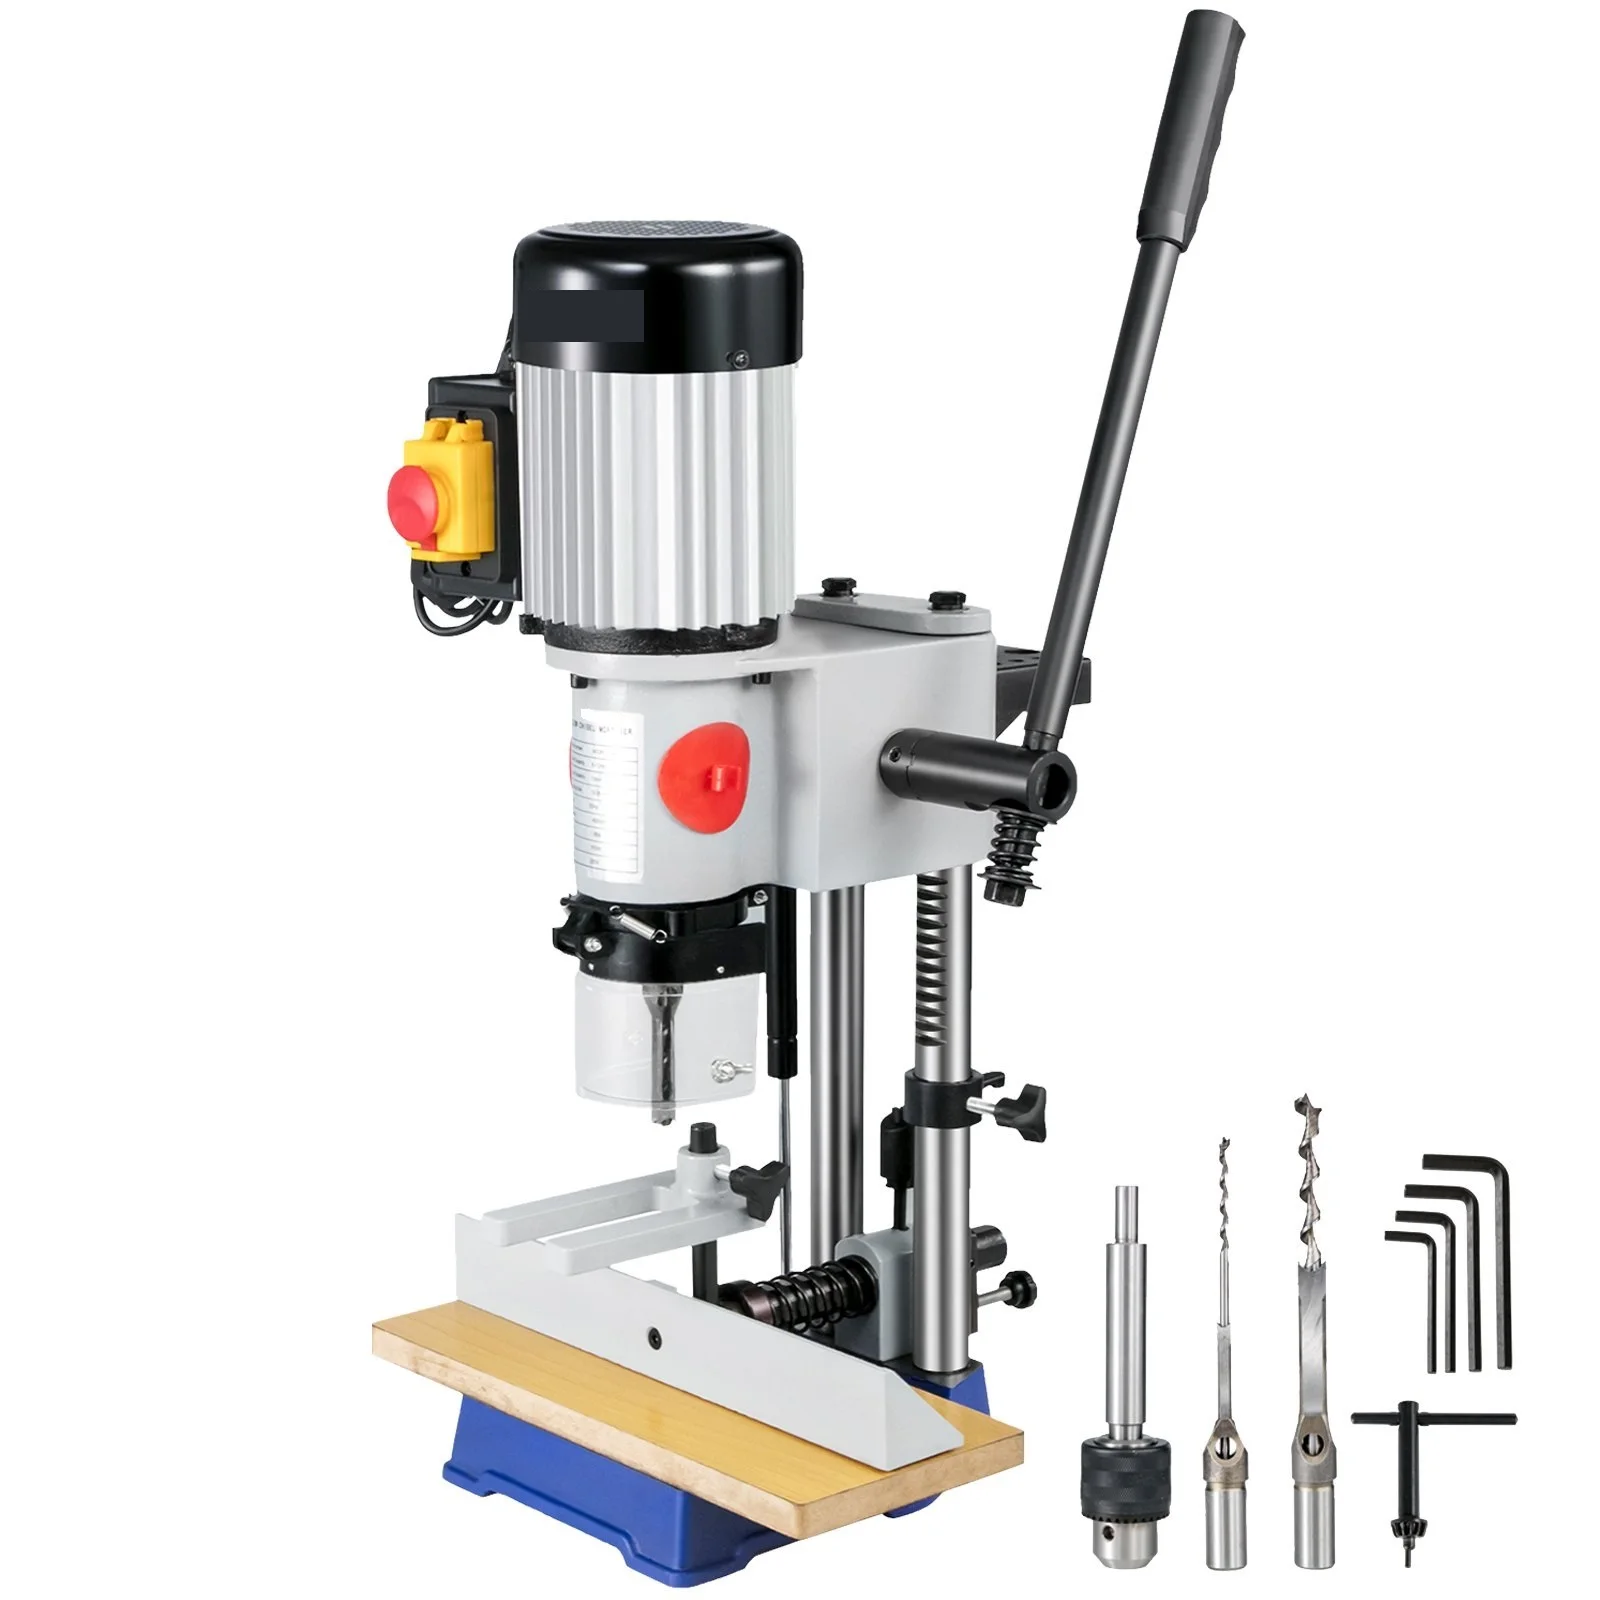 

Woodworking Mortise Machine 3/4 HP Powermatic Mortiser With Chisel Bit Sets Benchtop Mortising Machine 750W Square Tenon Machine